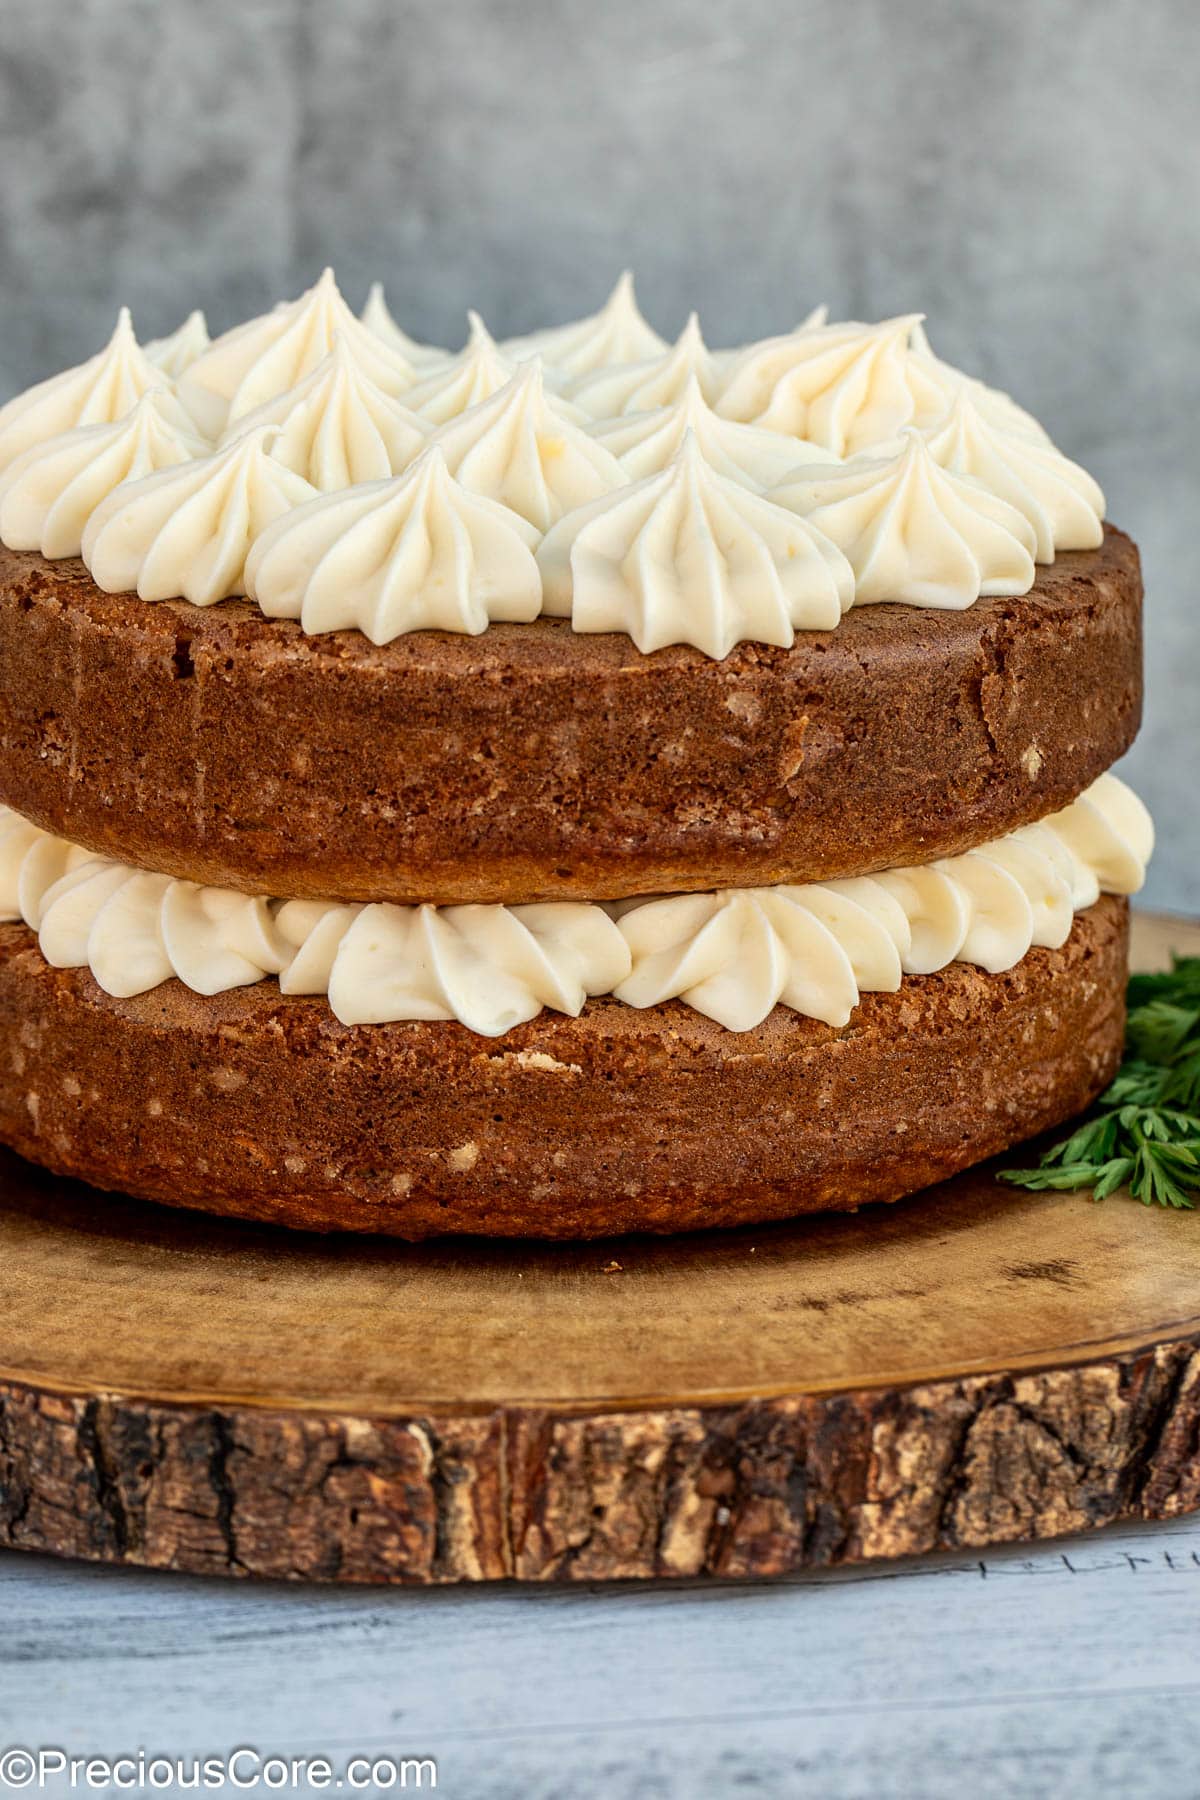 Decorated carrot cake with cream cheese frosting.